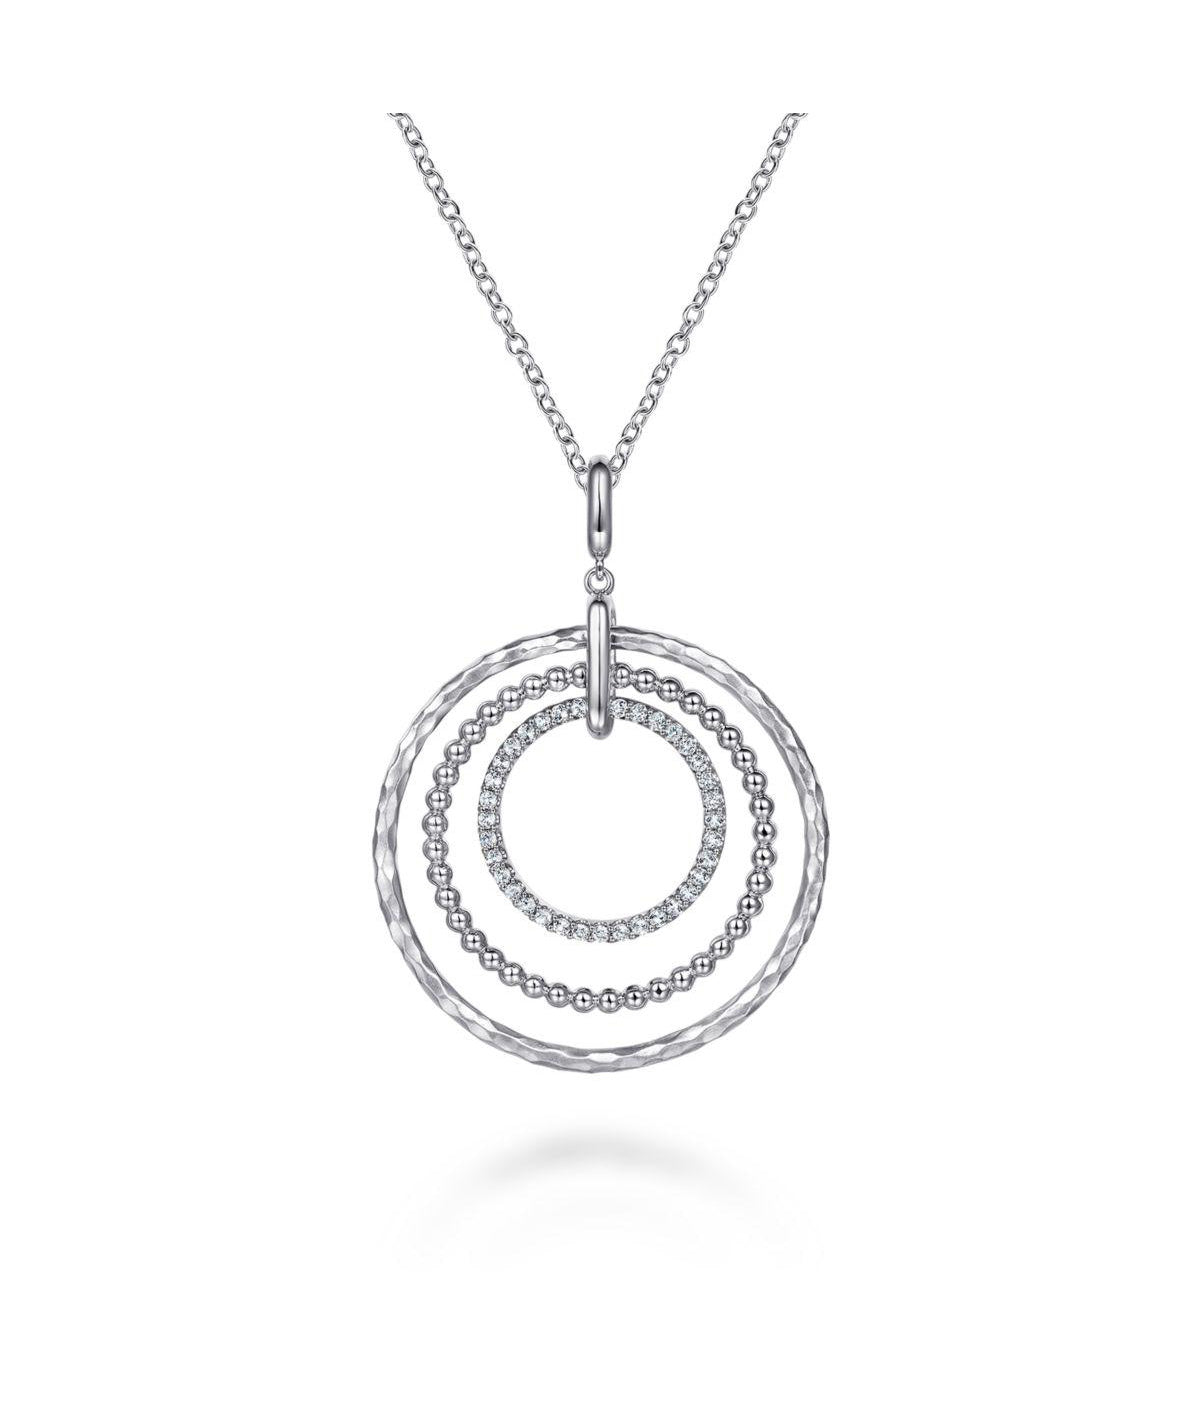 24 inch 925 Sterling Silver Triple Row Circle Pendant Necklace with White Sapphire